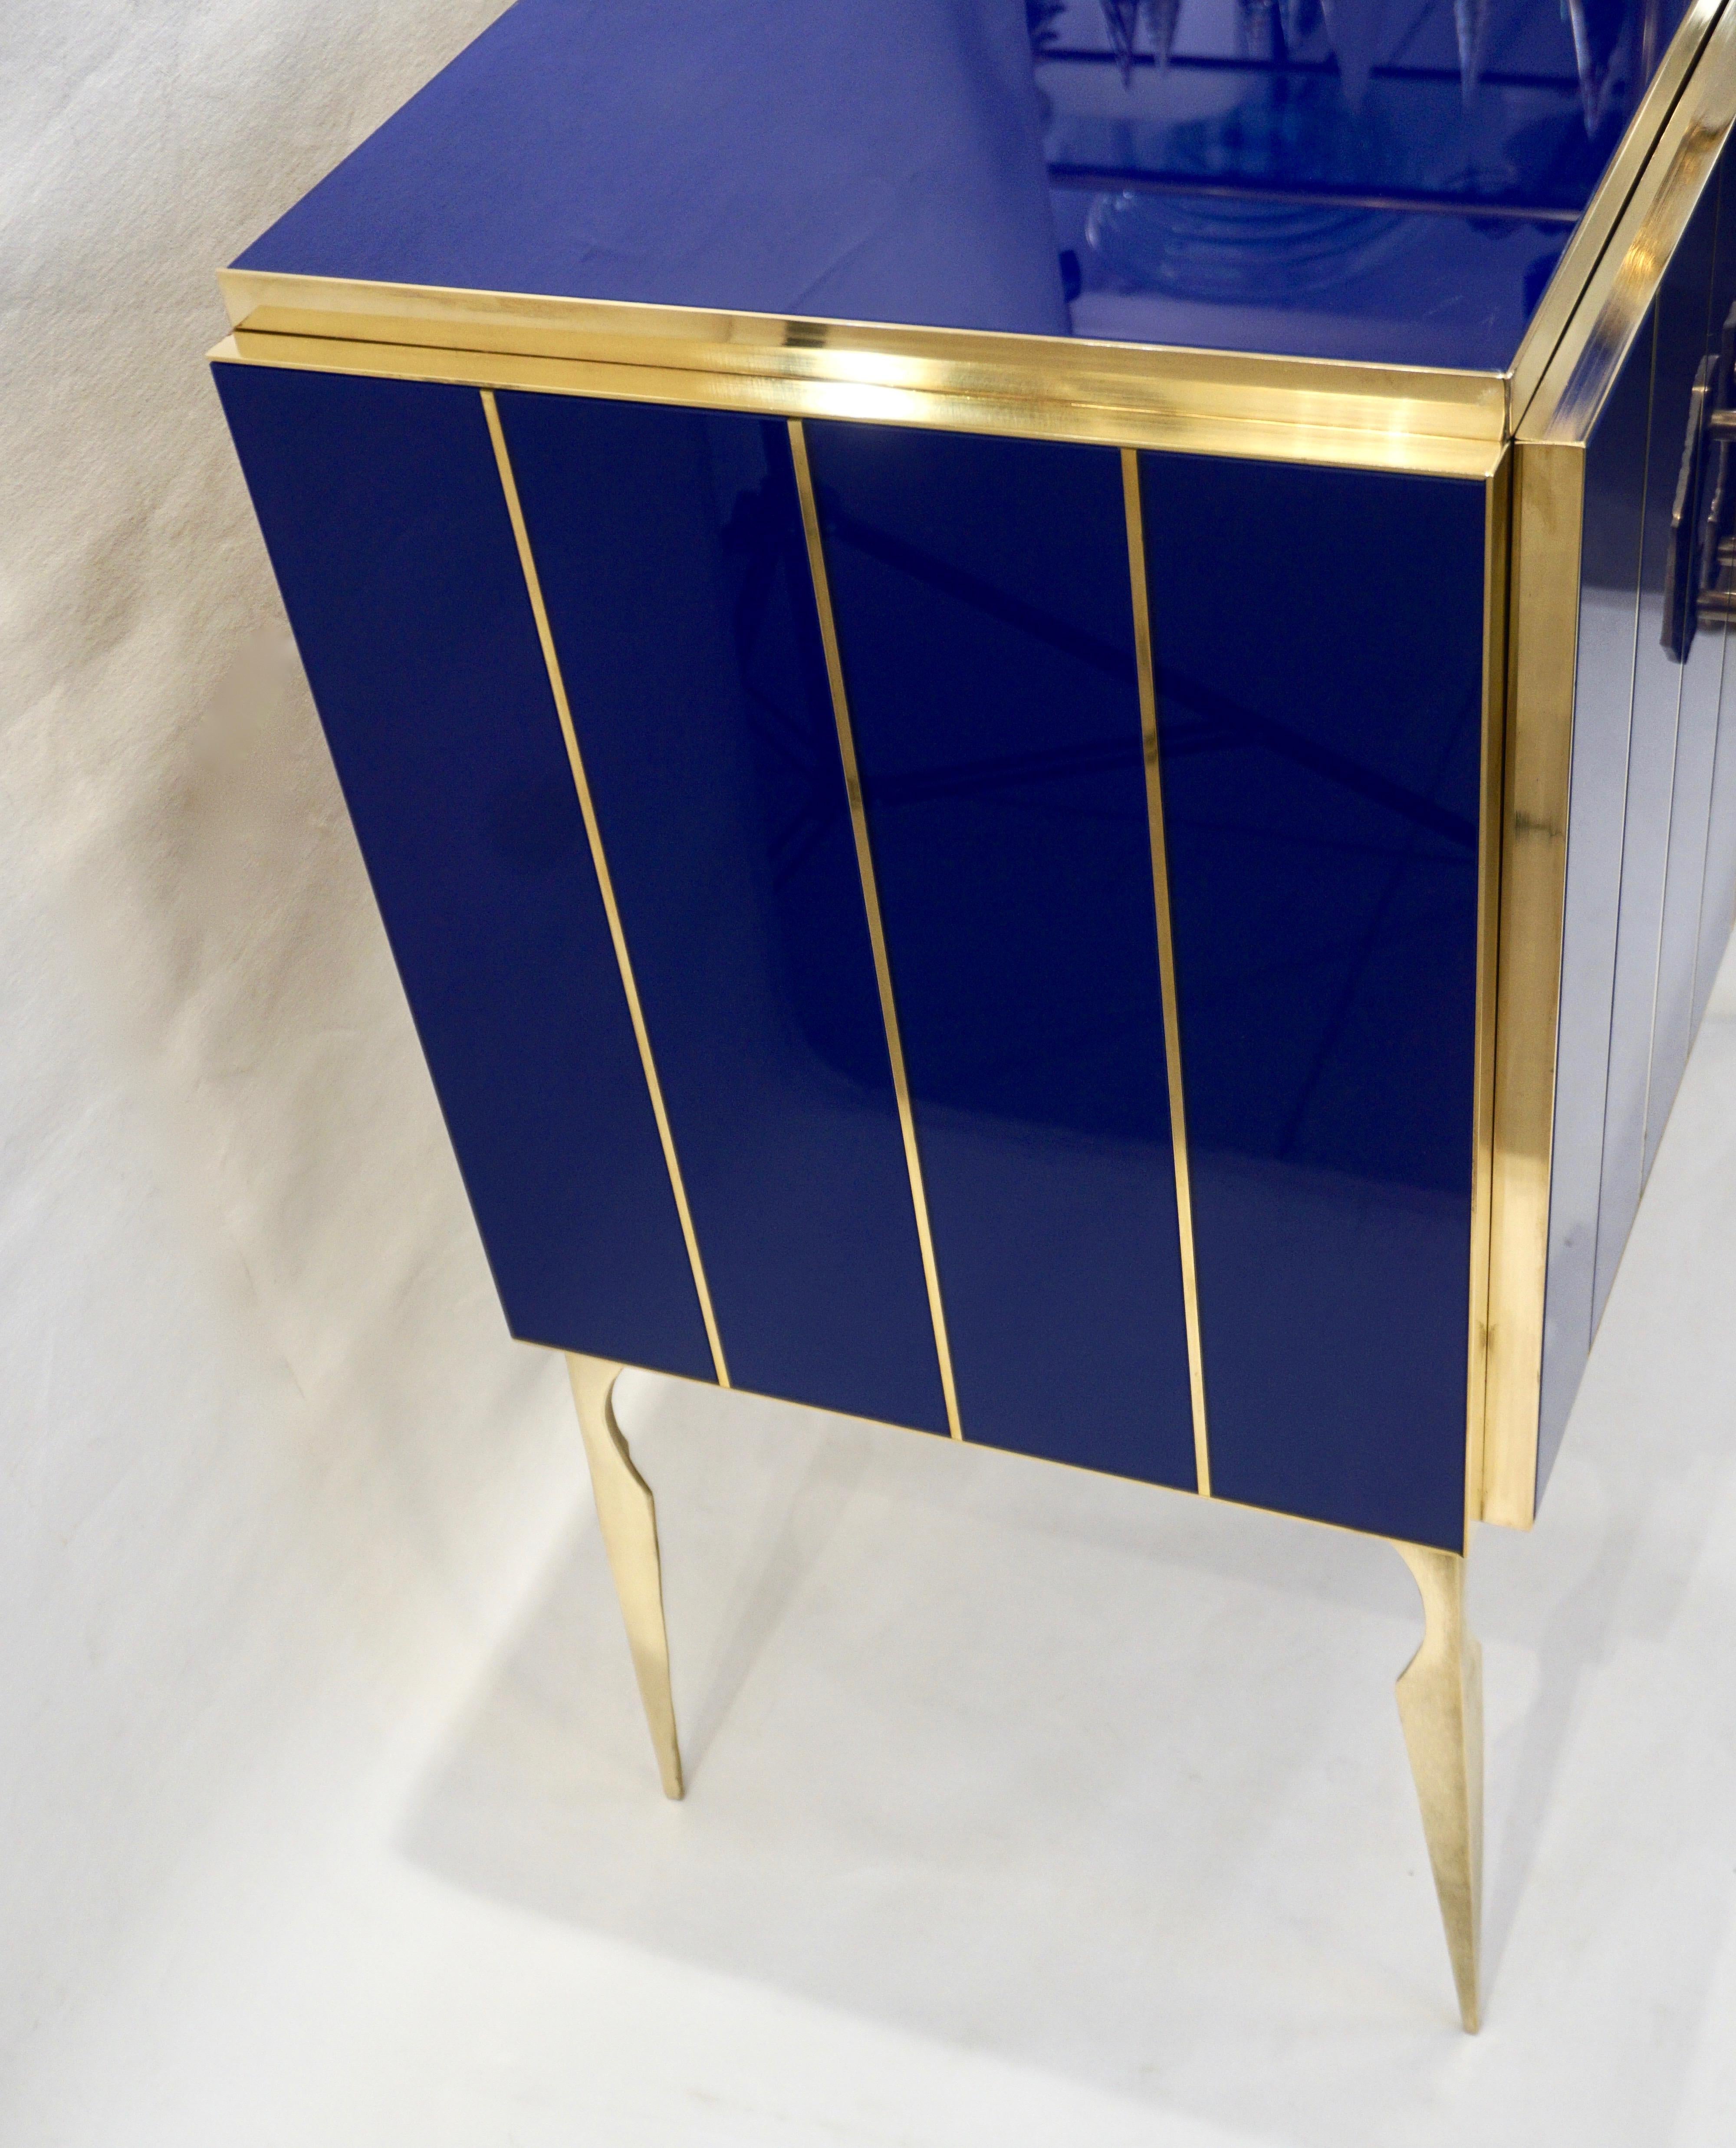 Contemporary Italian Custom Art Deco Style Royal Blue Glass Modern Cabinet /Bar In New Condition For Sale In New York, NY